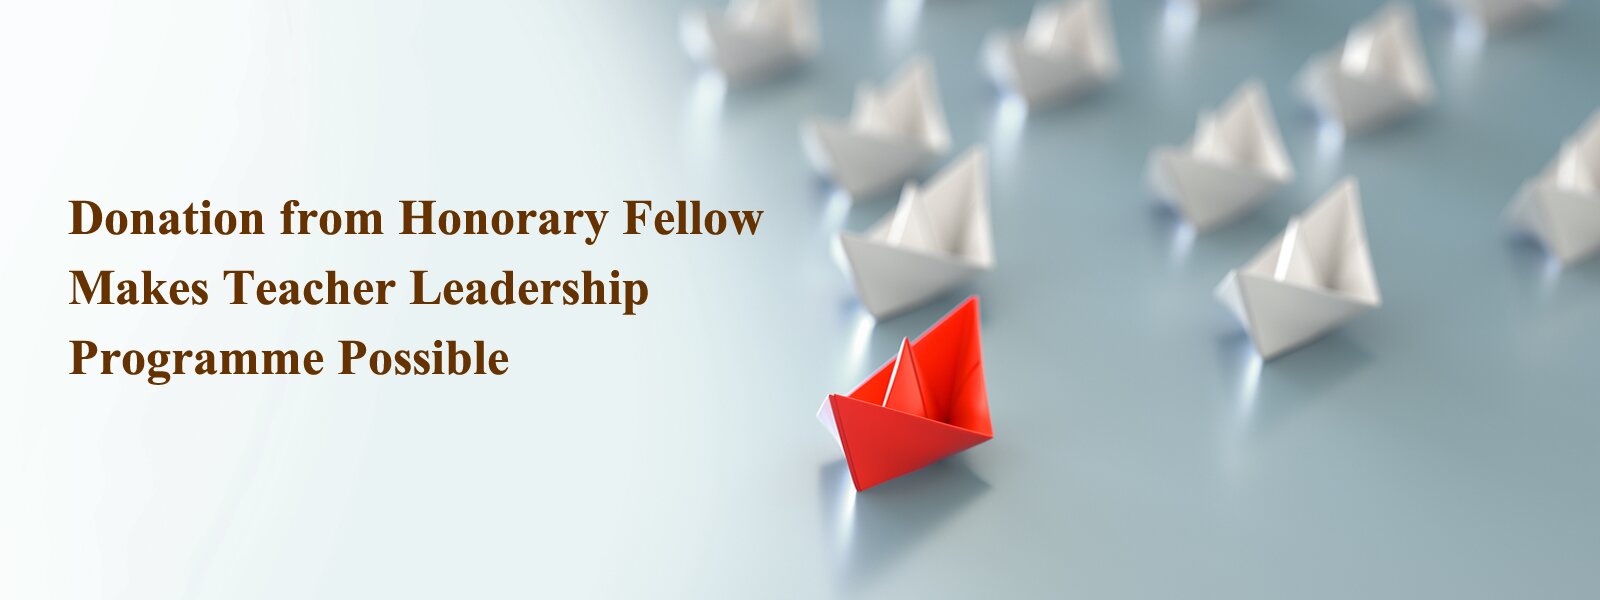 Donation from Honorary Fellow Makes Teacher Leadership Programme Possible